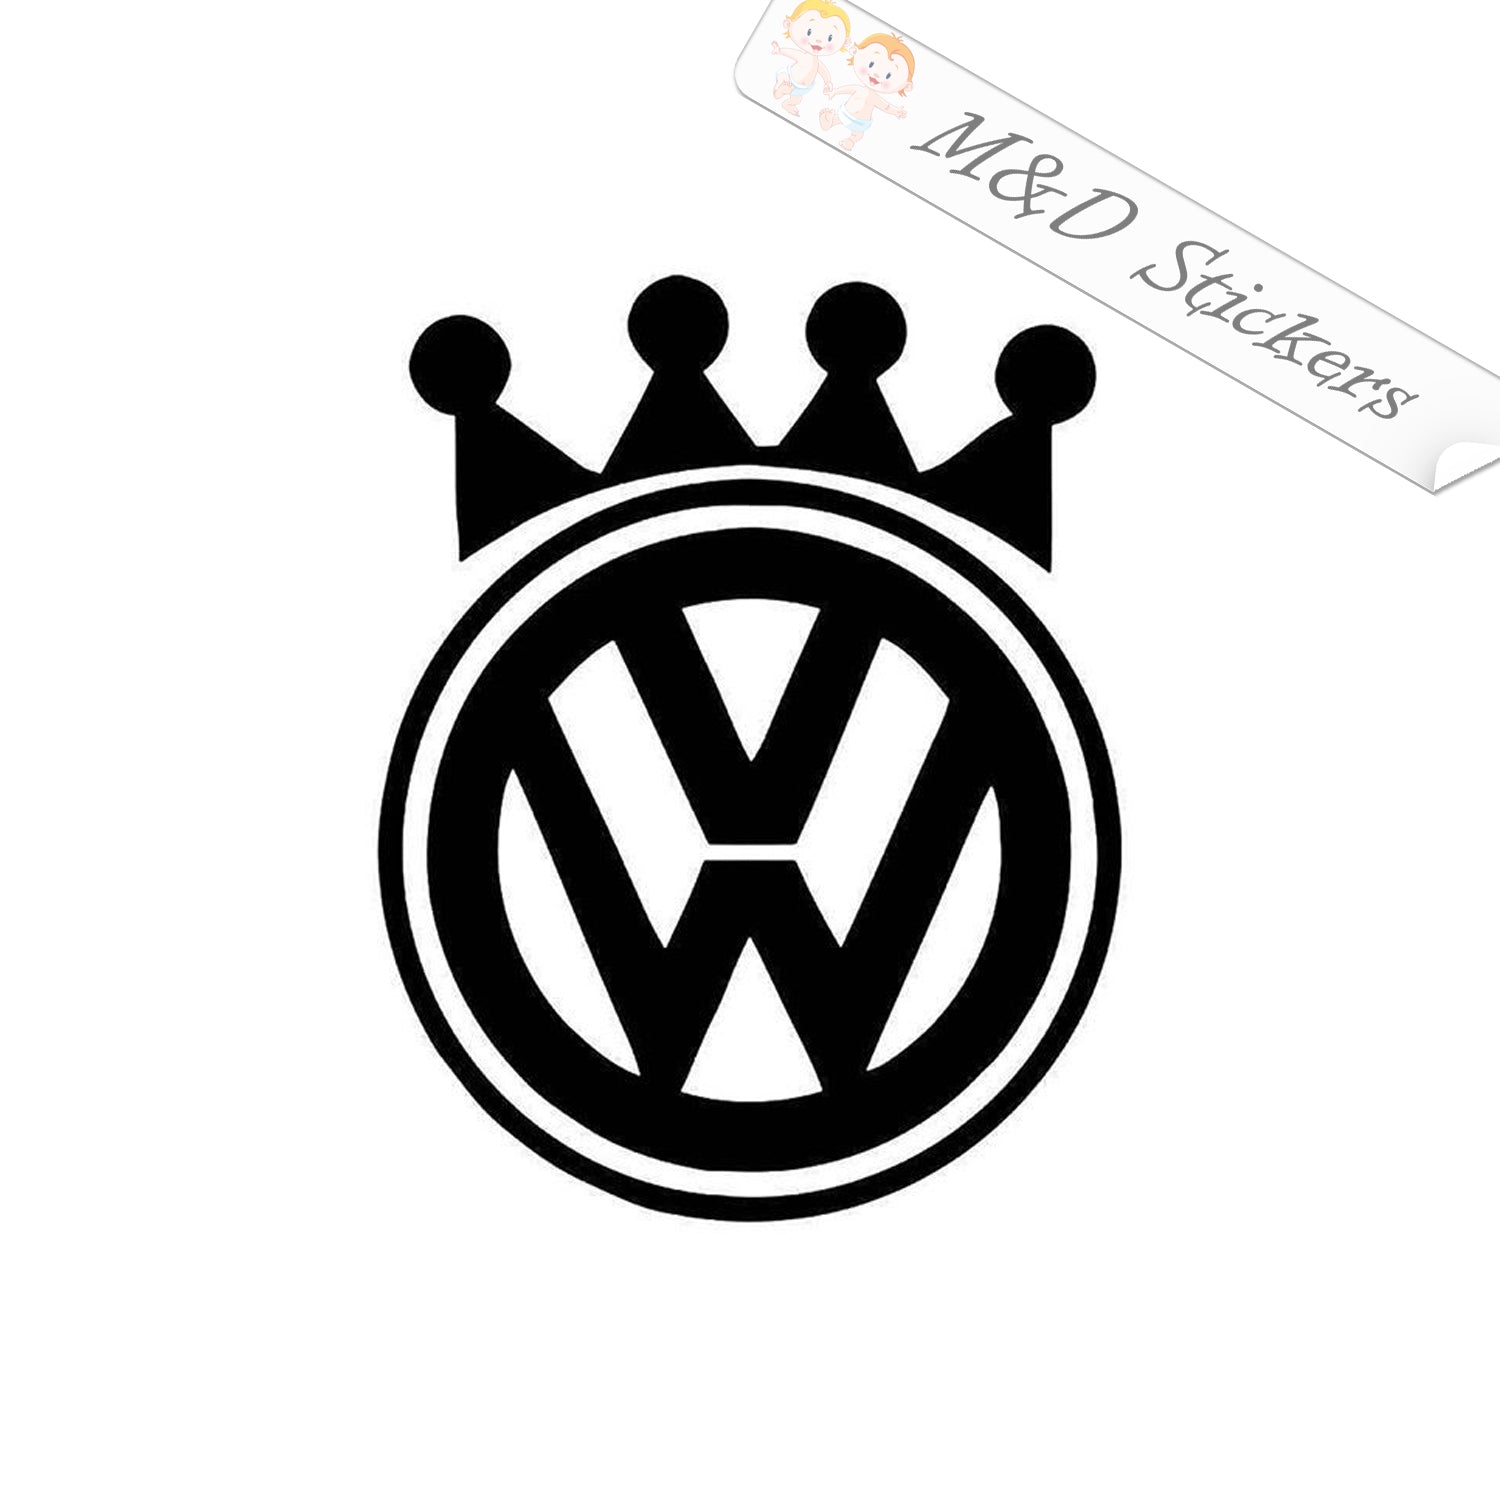 Crown Logo On Letter V Template Crown Logo On V Letter Initial Crown Sign  Concept Template Stock Illustration - Download Image Now - iStock